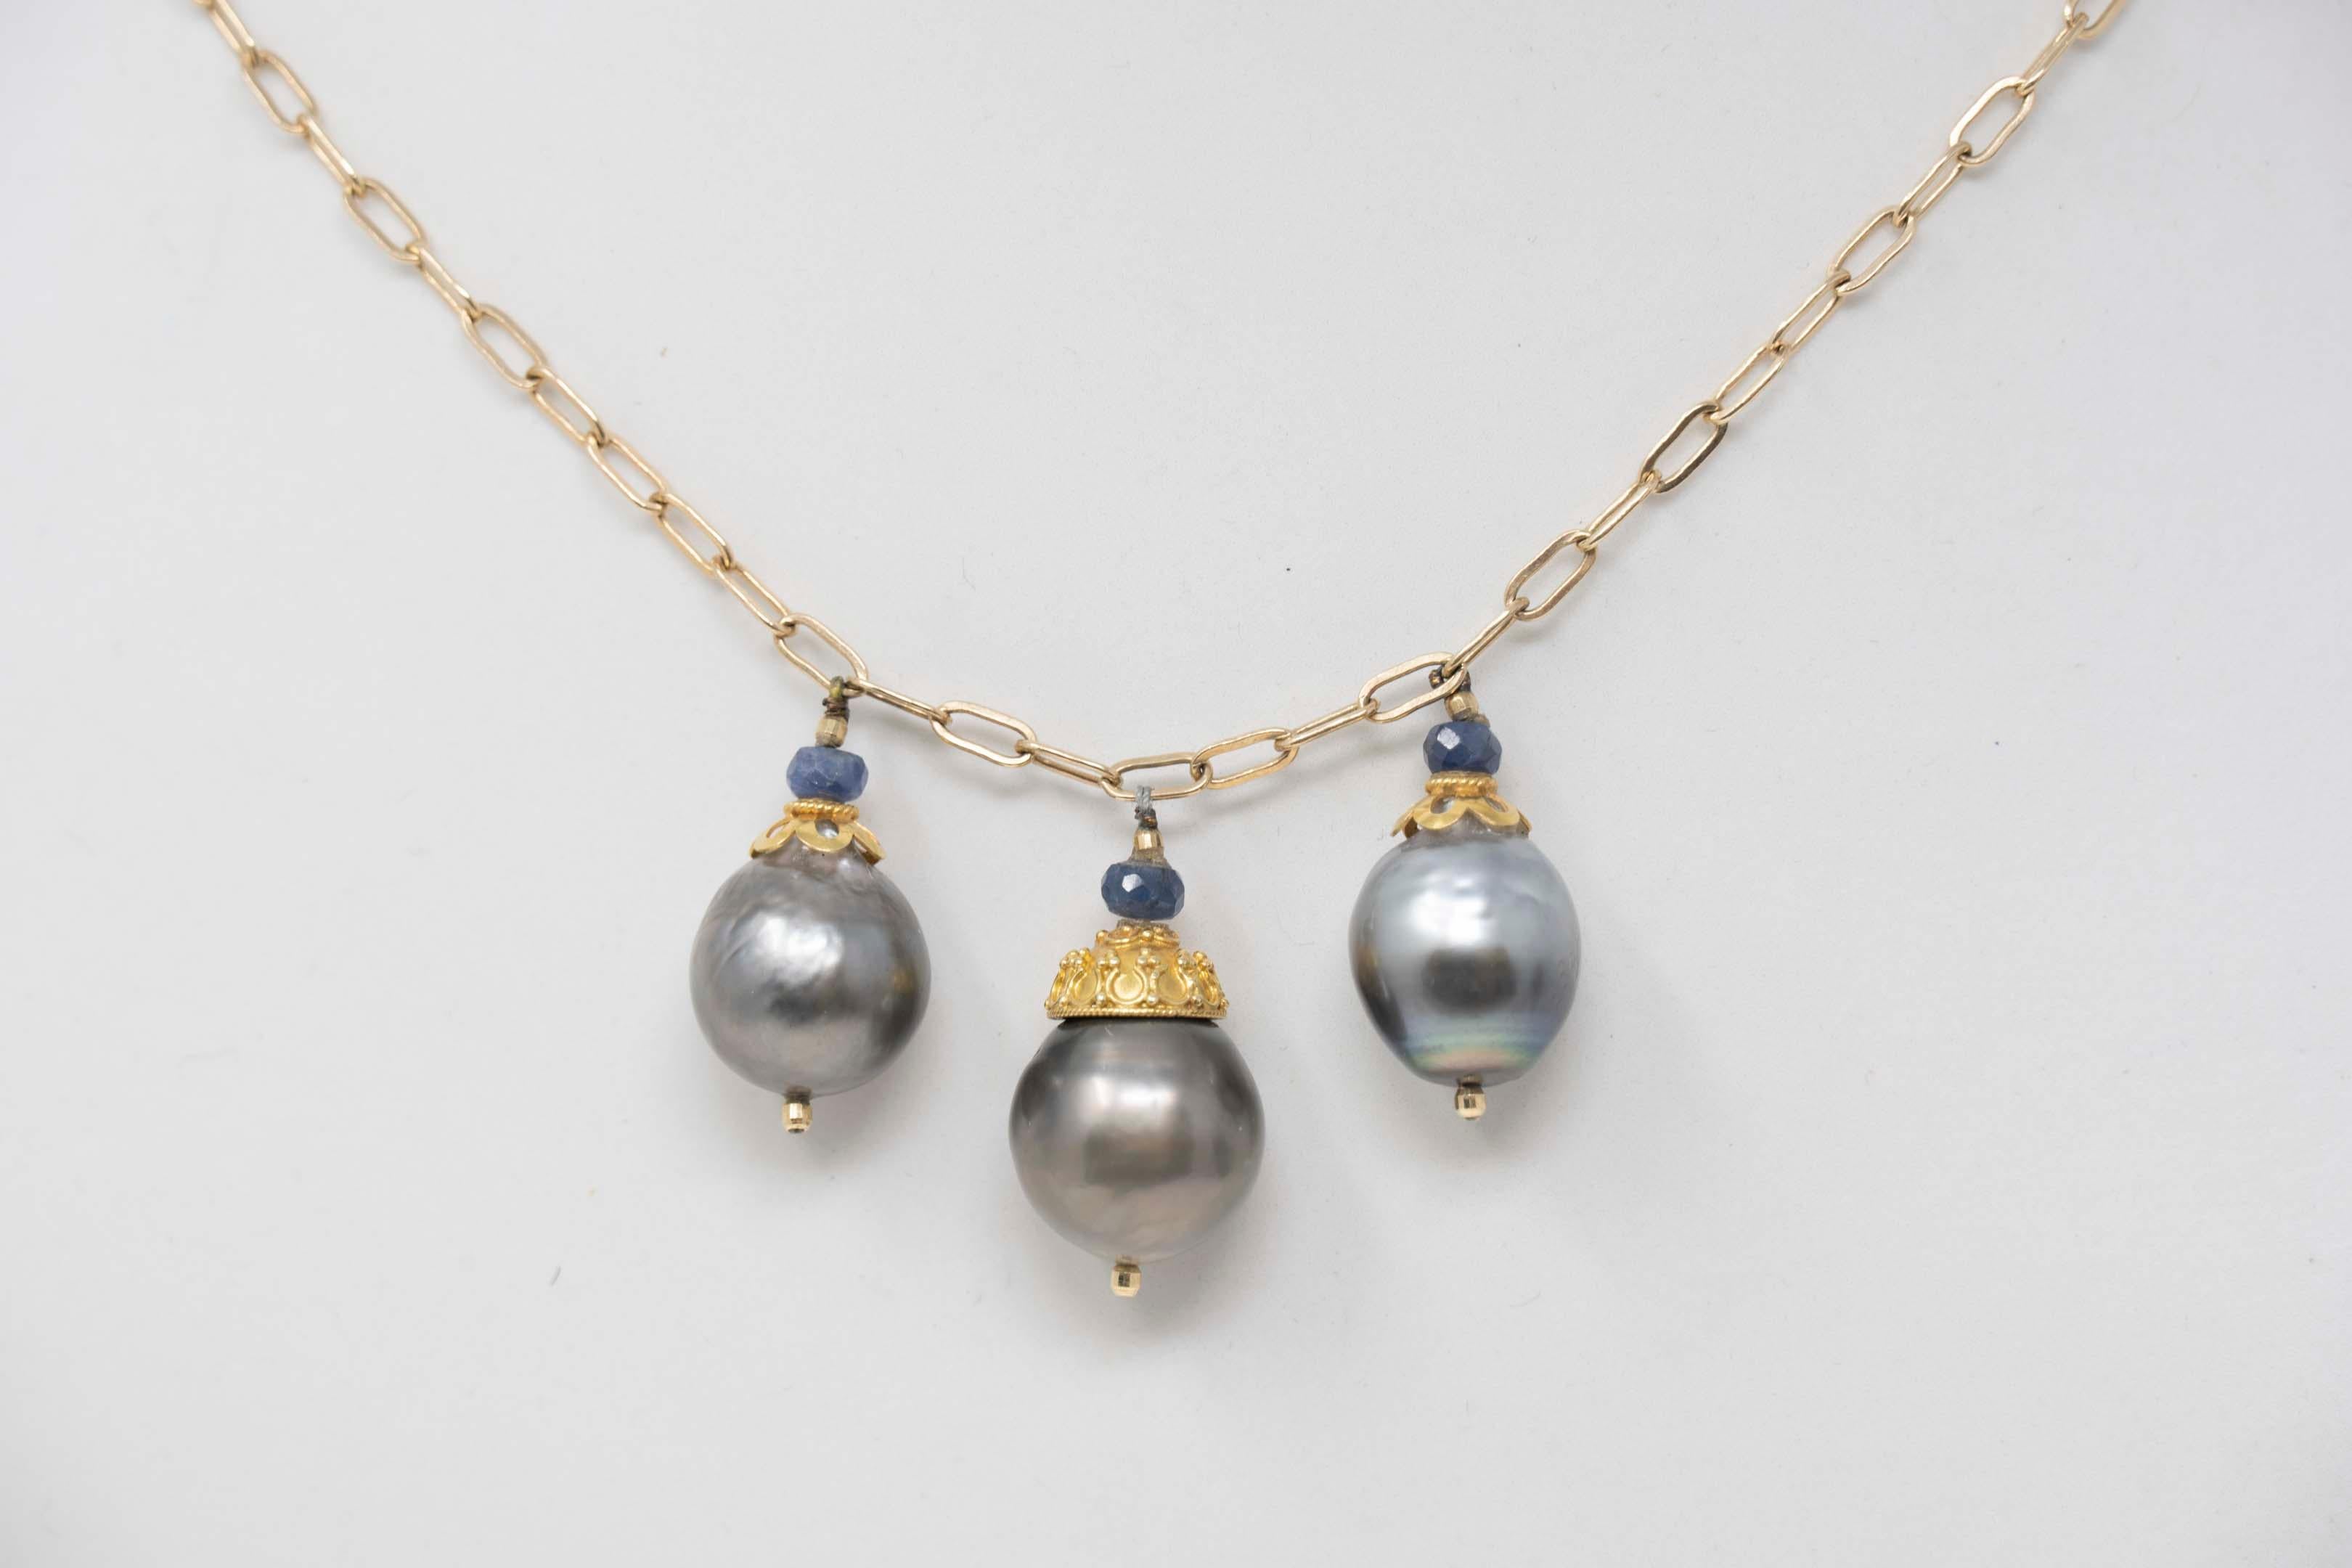 One (1) ladies necklace in yellow 14 karat (stamped), fantasy style, polished finish. Total weight 17.5 grams. The item is set with three (3) baroque cultured Tahiti pearls. Measures 12-14mm in diameter. Primary color: gray. Nacre thickness: thick